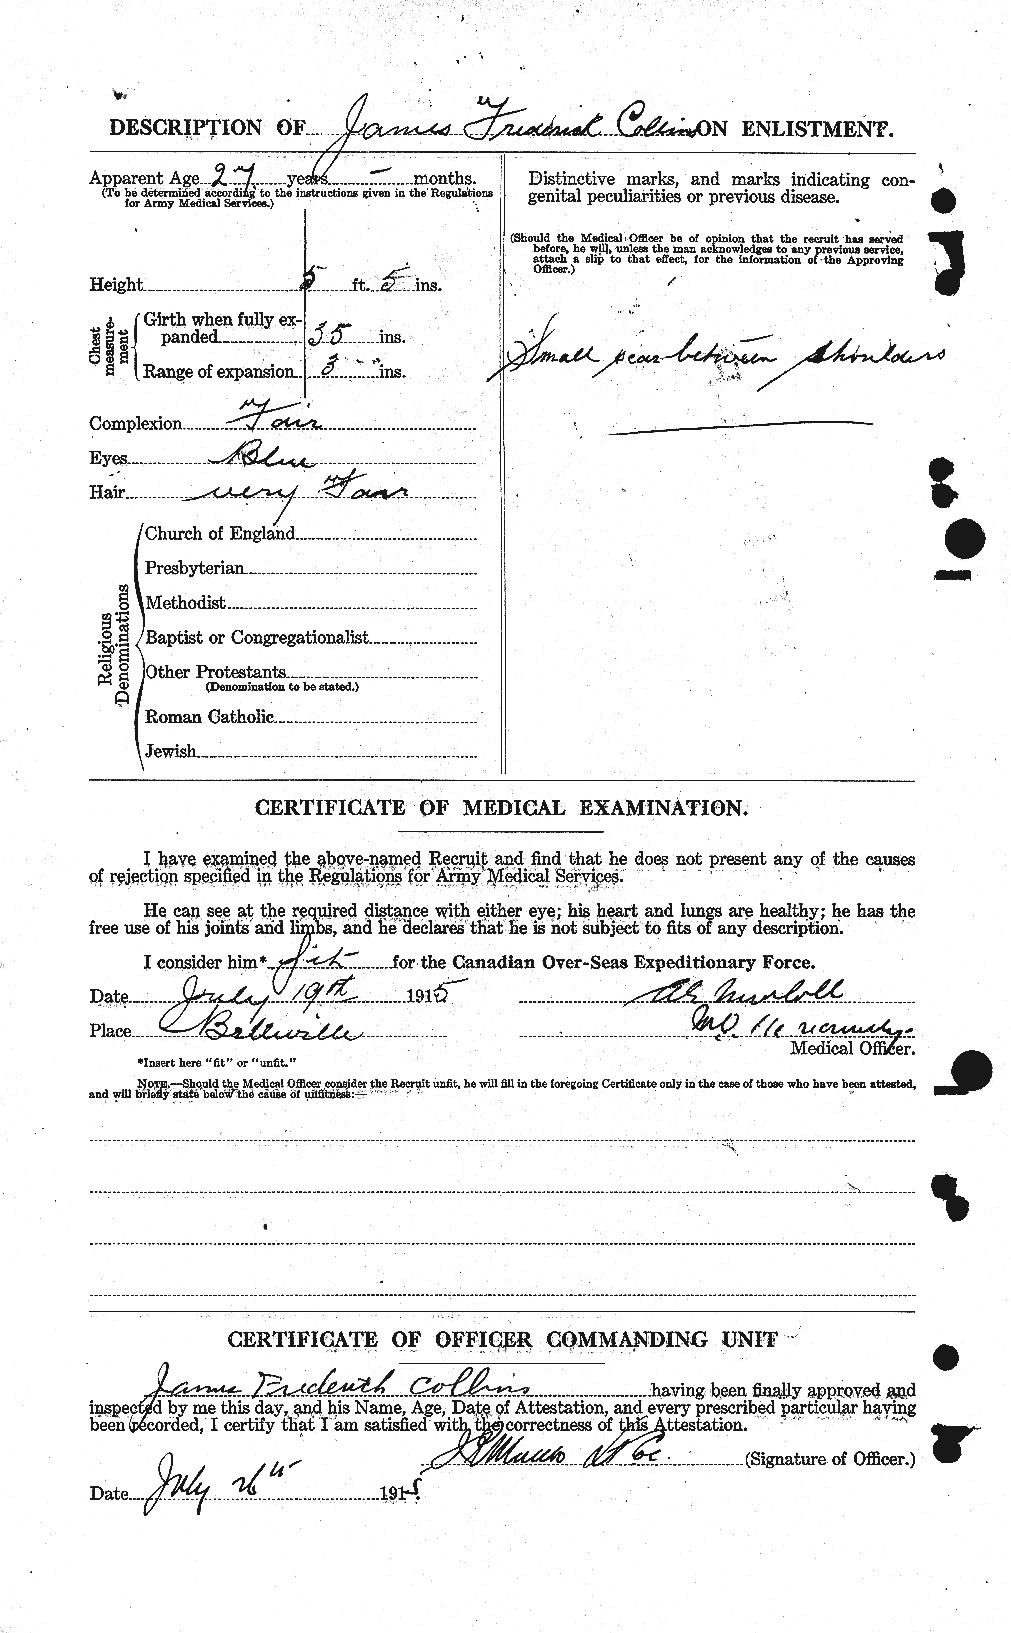 Personnel Records of the First World War - CEF 069950b